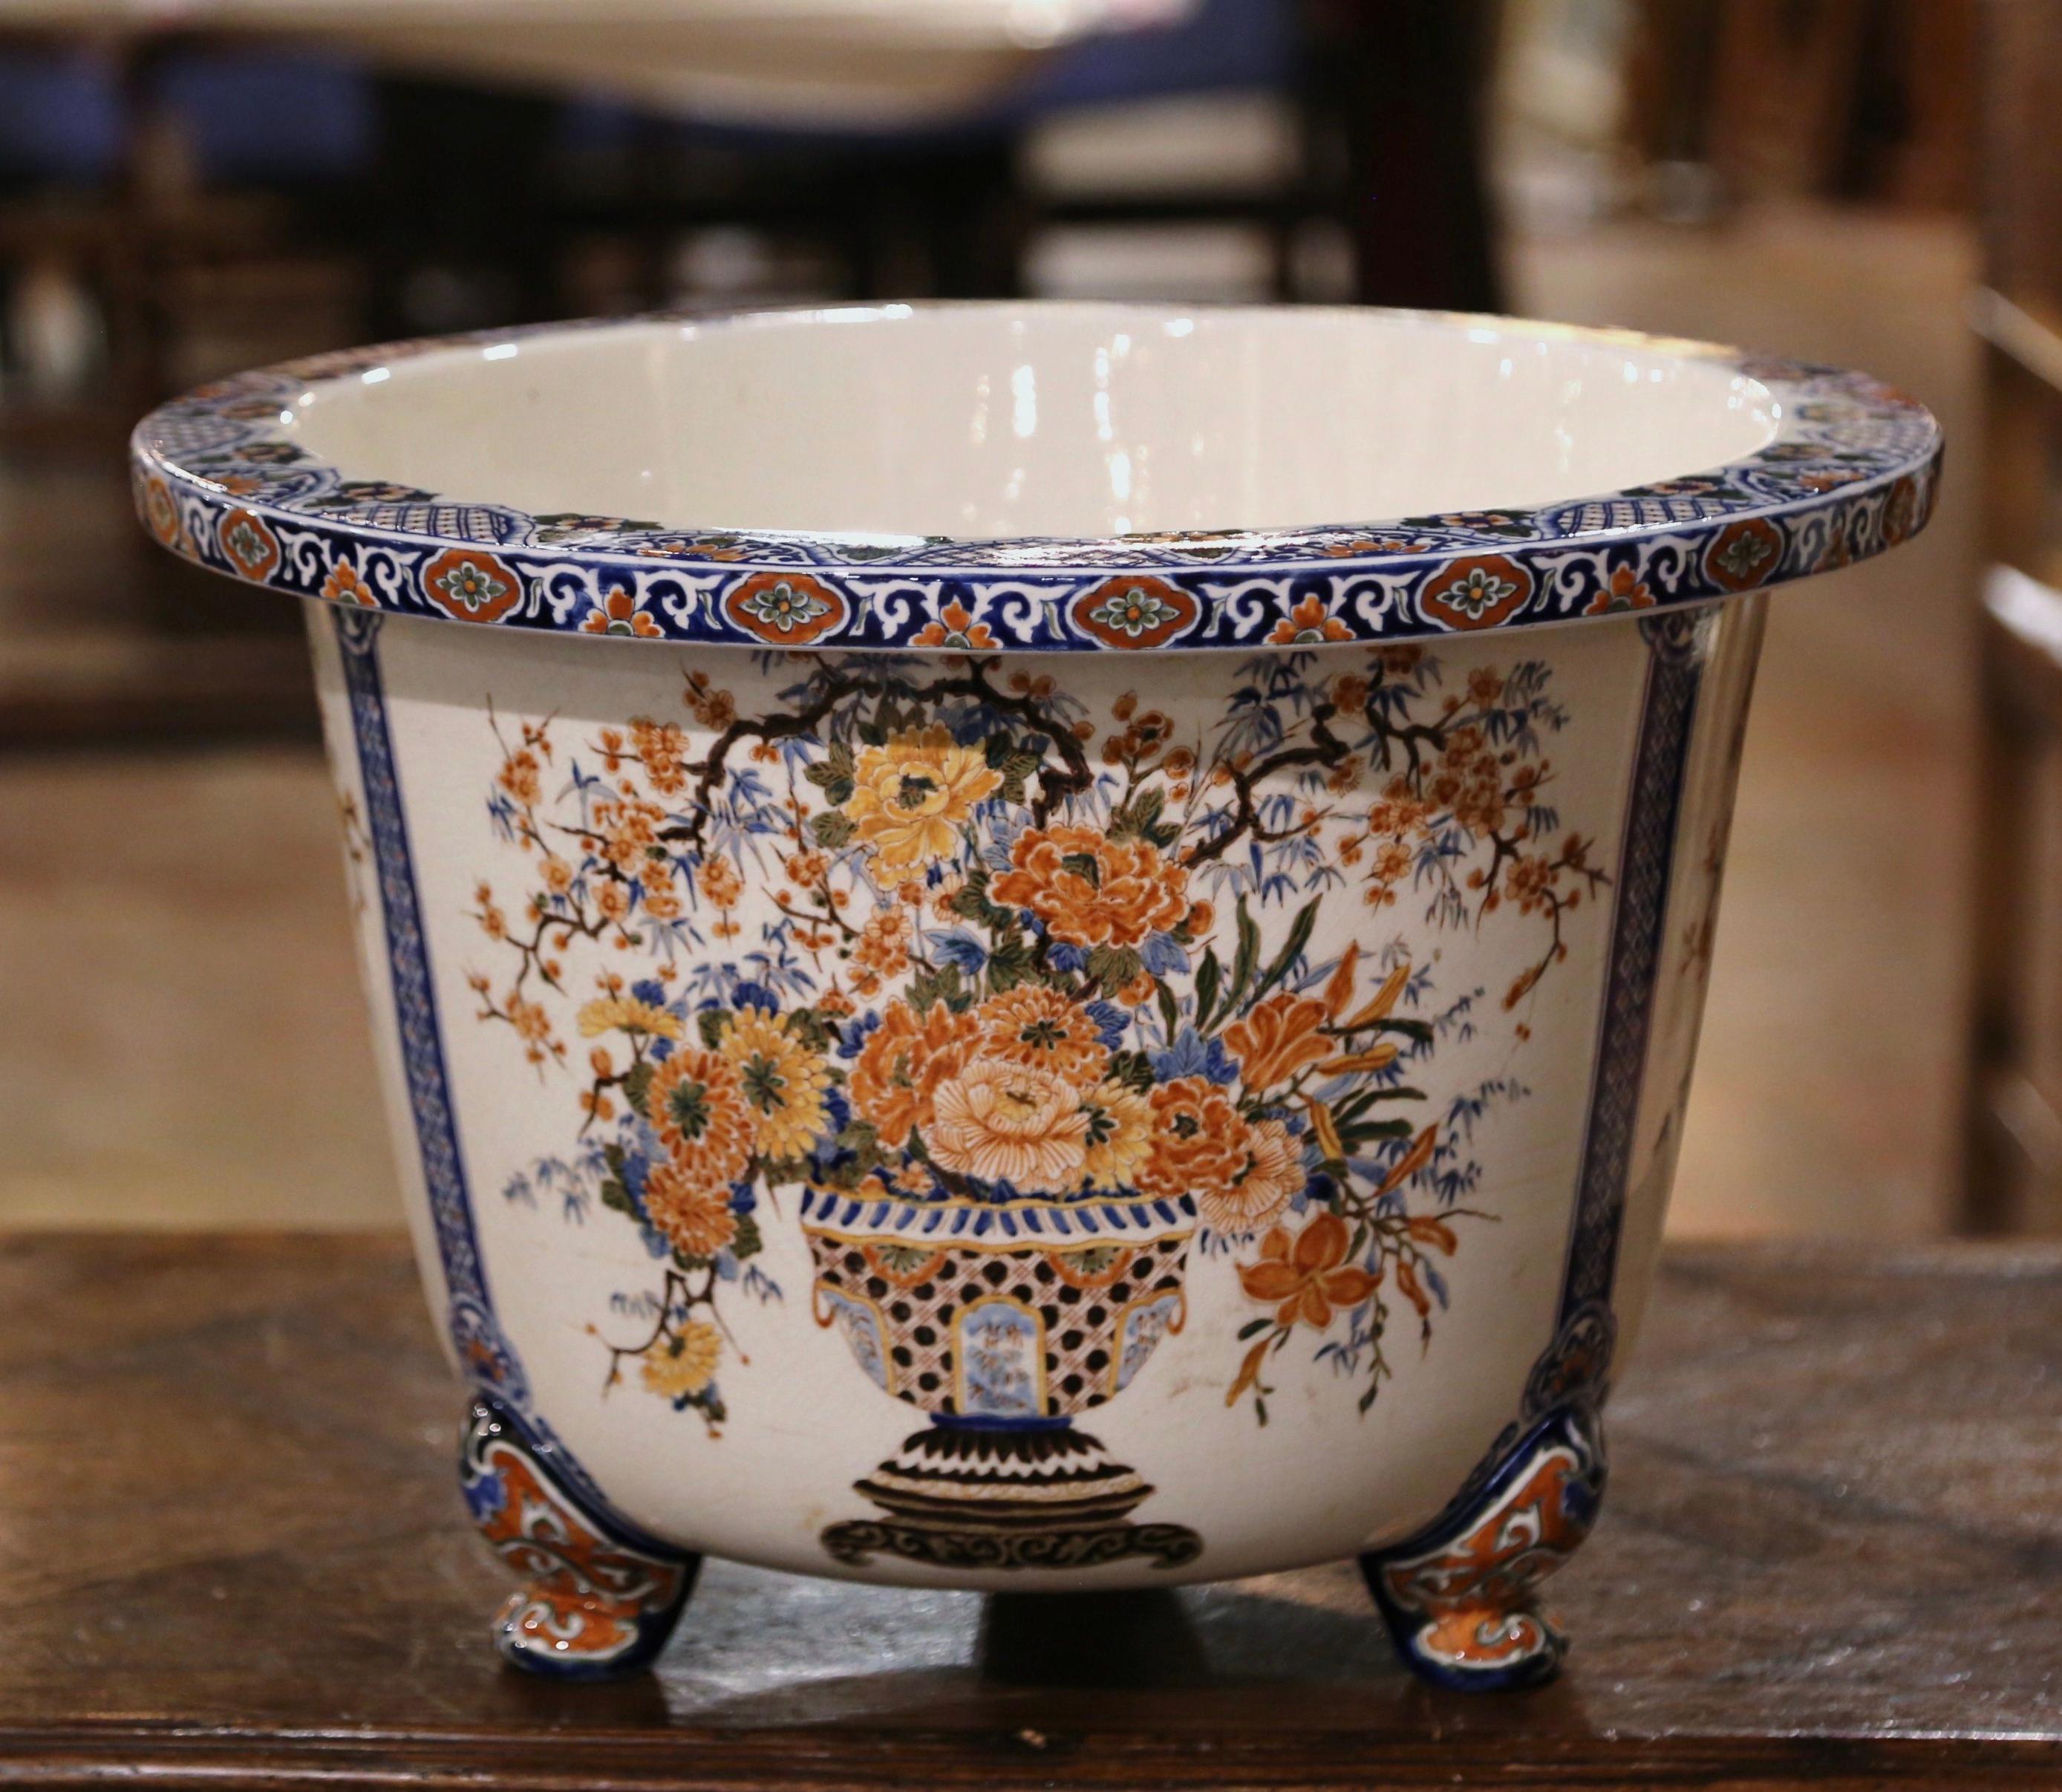 This important and colorful antique cache pot was crafted in Normandy, France, circa 1950. Standing on three dolphin form feet, the large porcelain planter is decorated with three floral medallions around the perimeter, and embellished with a blue